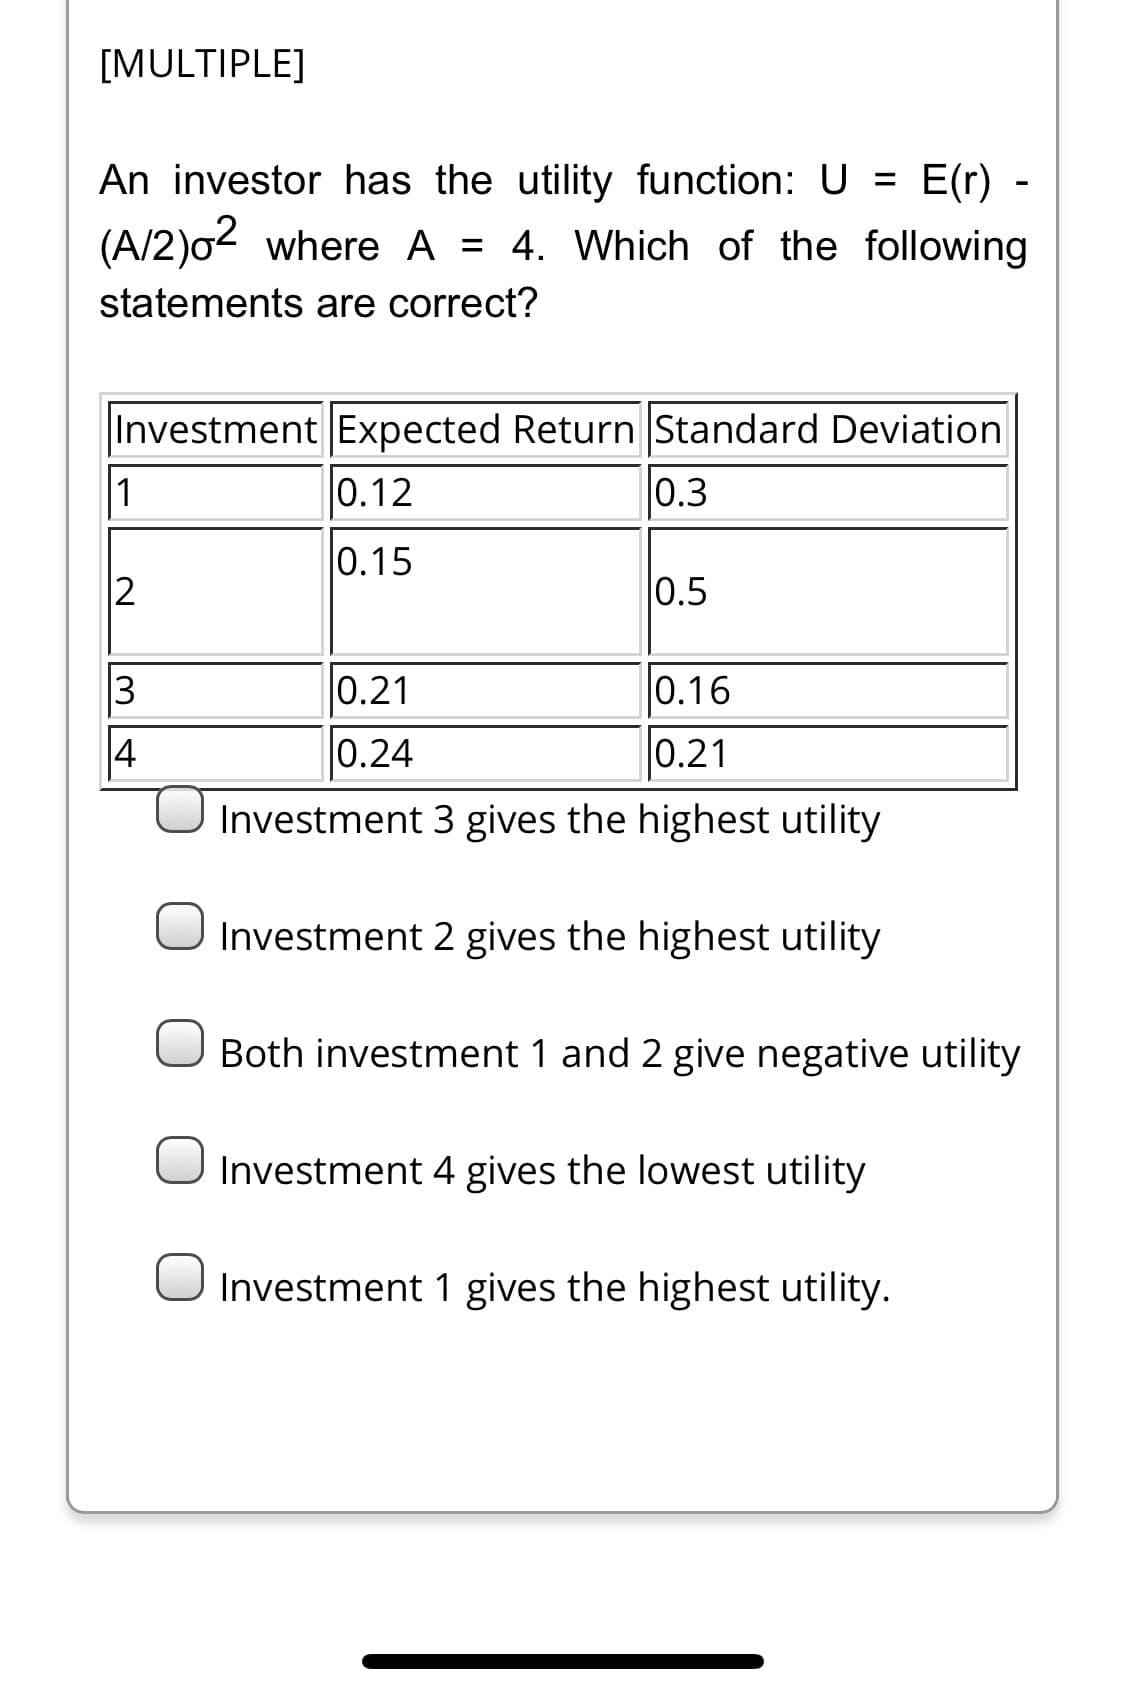 [MULTIPLE]
An investor has the utility function: U = E(r)
-
(A/2)o2 where A = 4. Which of the following
statements are correct?
Investment Expected Return Standard Deviation
1
0.12
0.3
0.15
0.5
0.21
0.16
14
0.24
0.21
Investment 3 gives the highest utility
Investment 2 gives the highest utility
Both investment 1 and 2 give negative utility
Investment 4 gives the lowest utility
Investment 1 gives the highest utility.
3.
